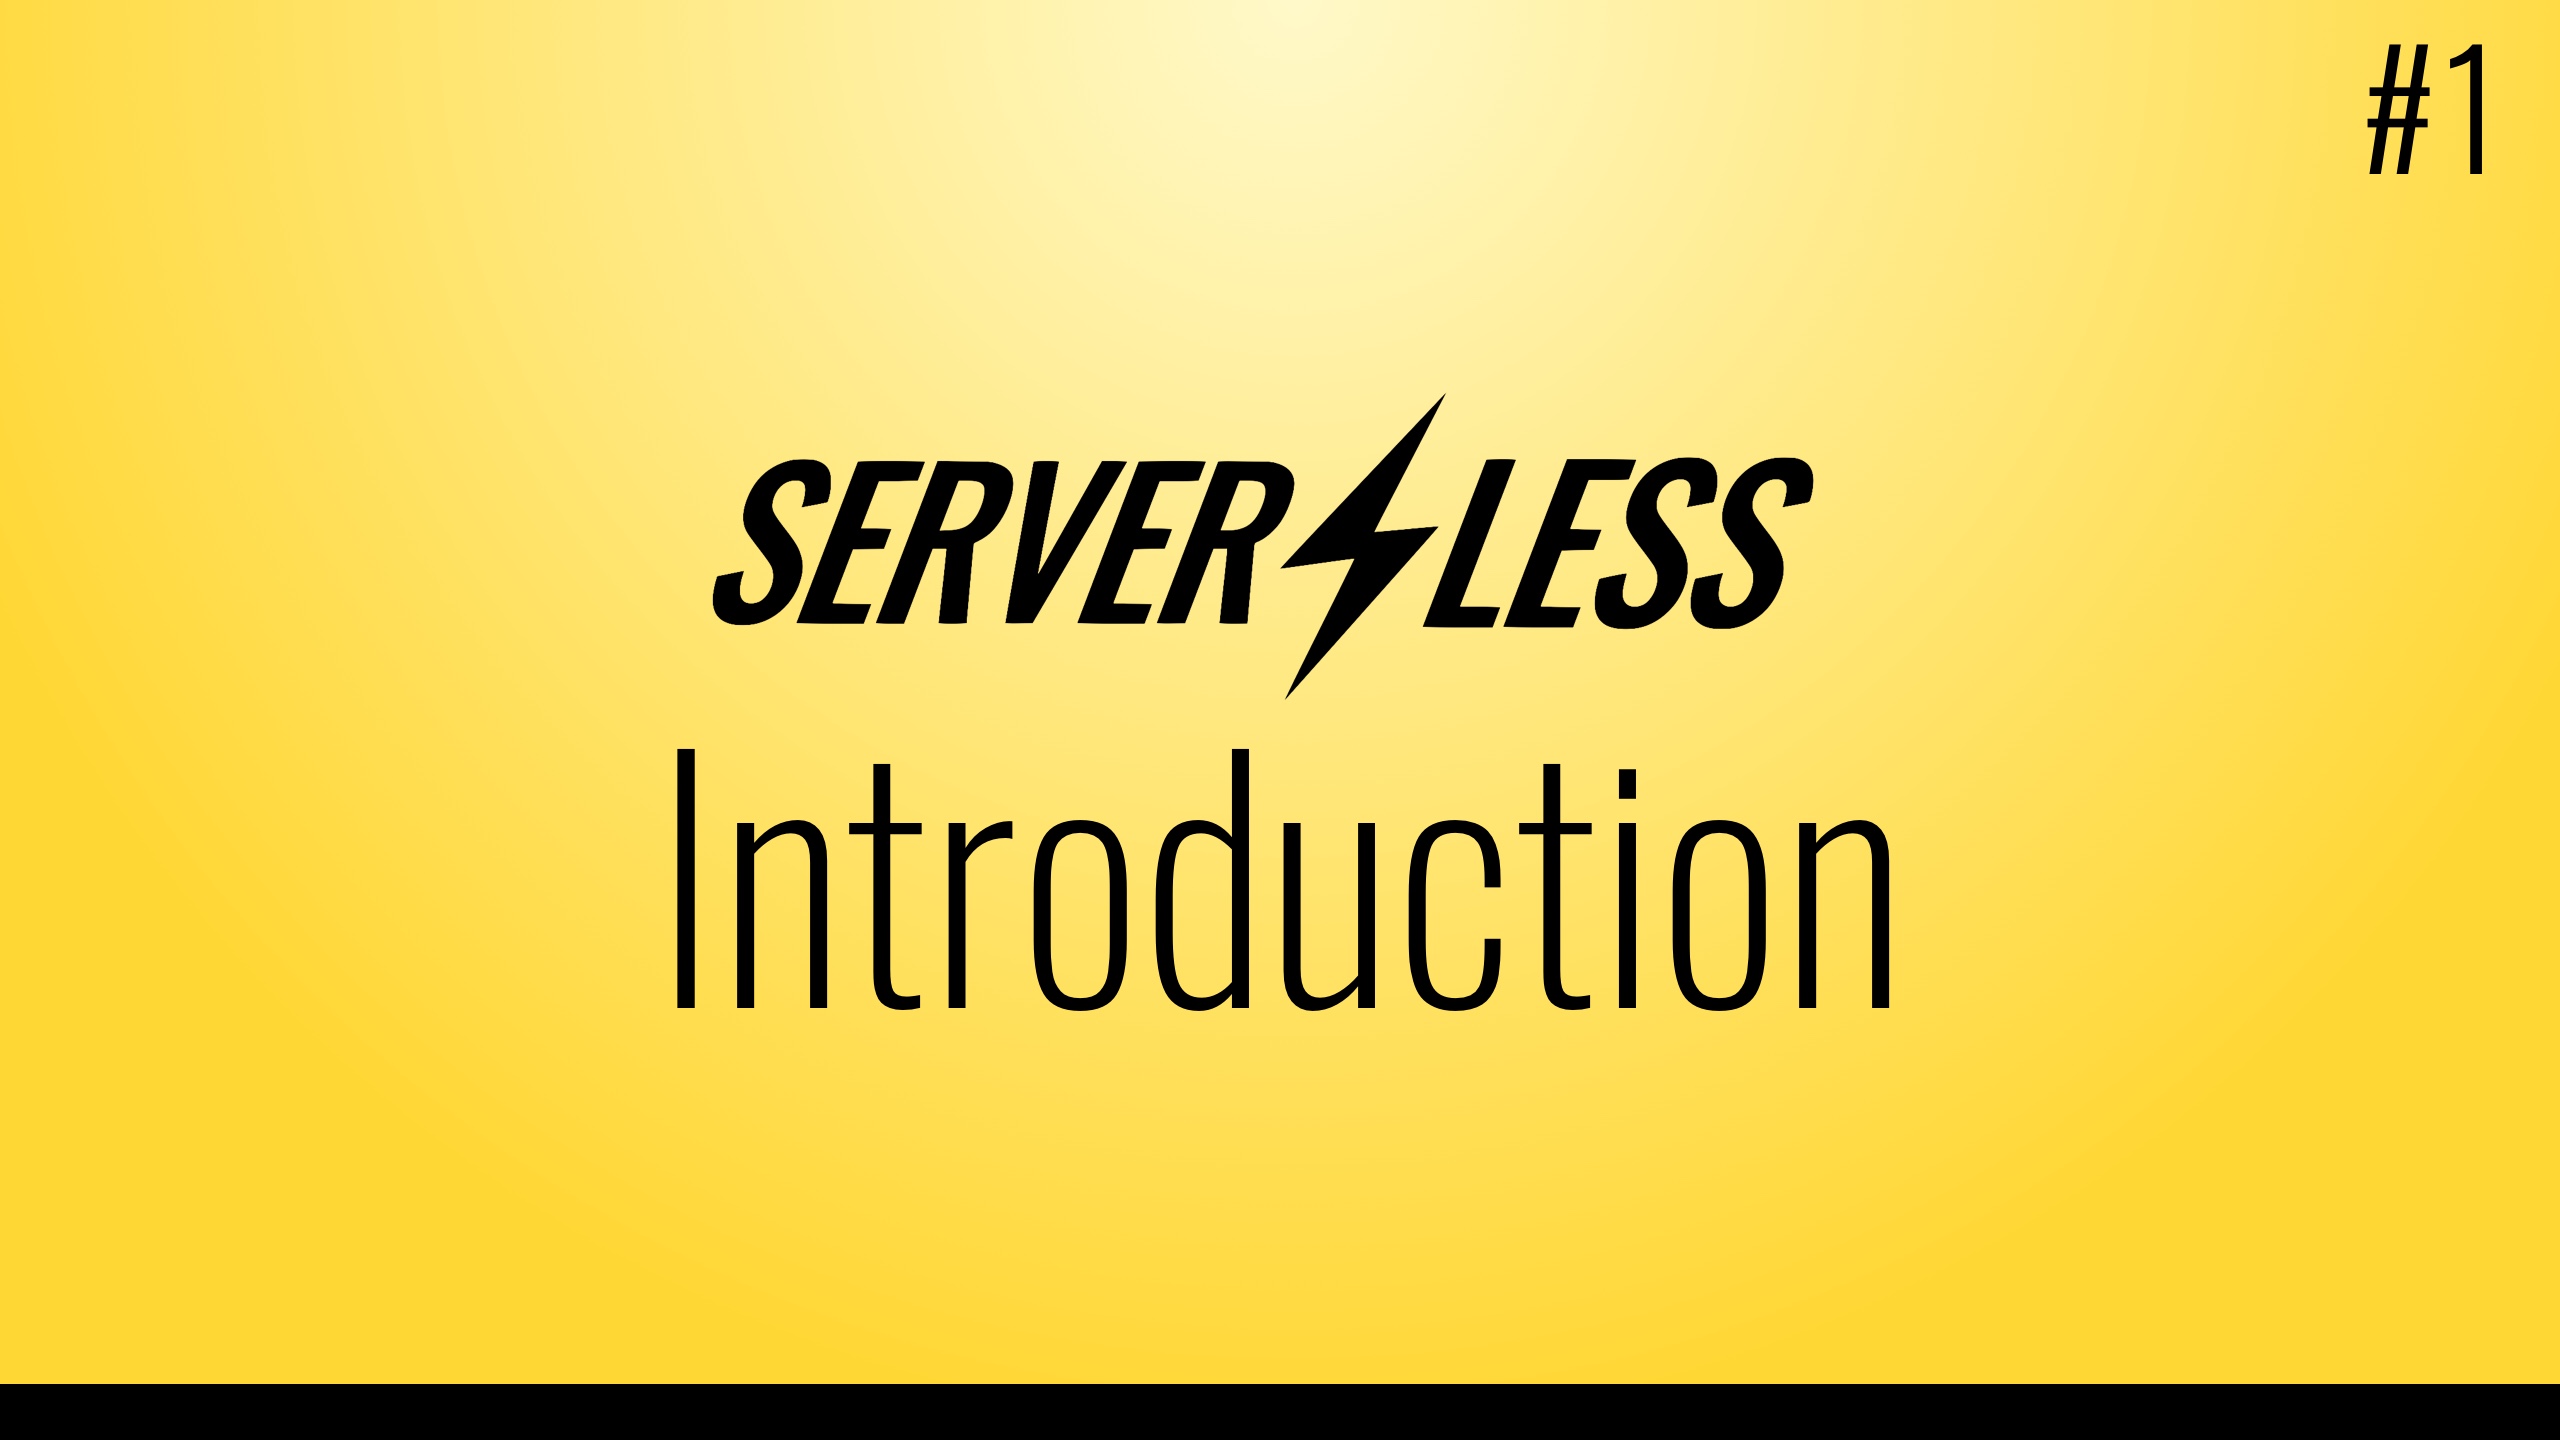 Thumbnail for post 'Introduction to the Serverless framework'